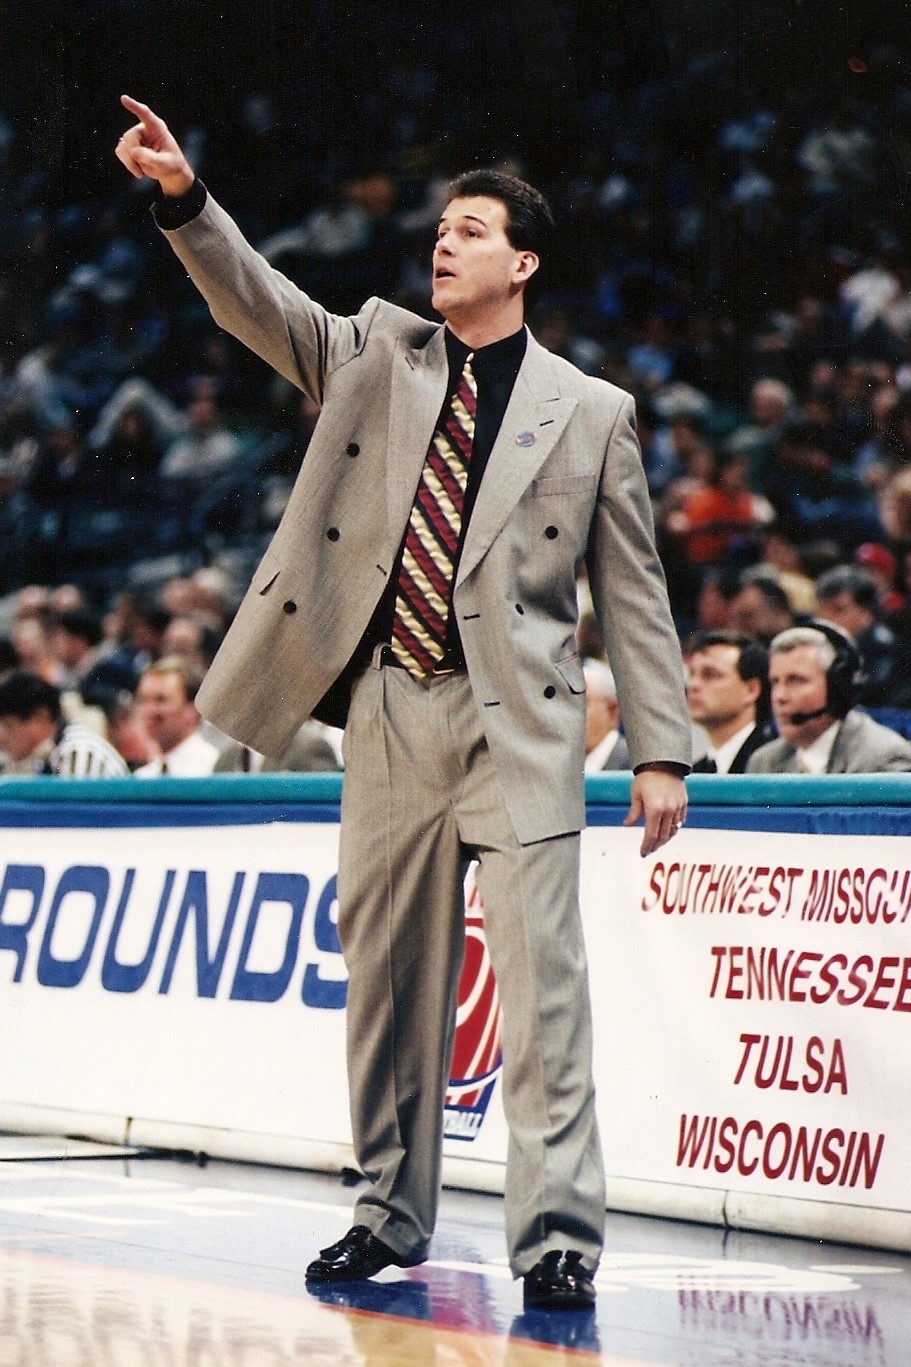 Steve Alford shouts instructions to his team during a basketball game